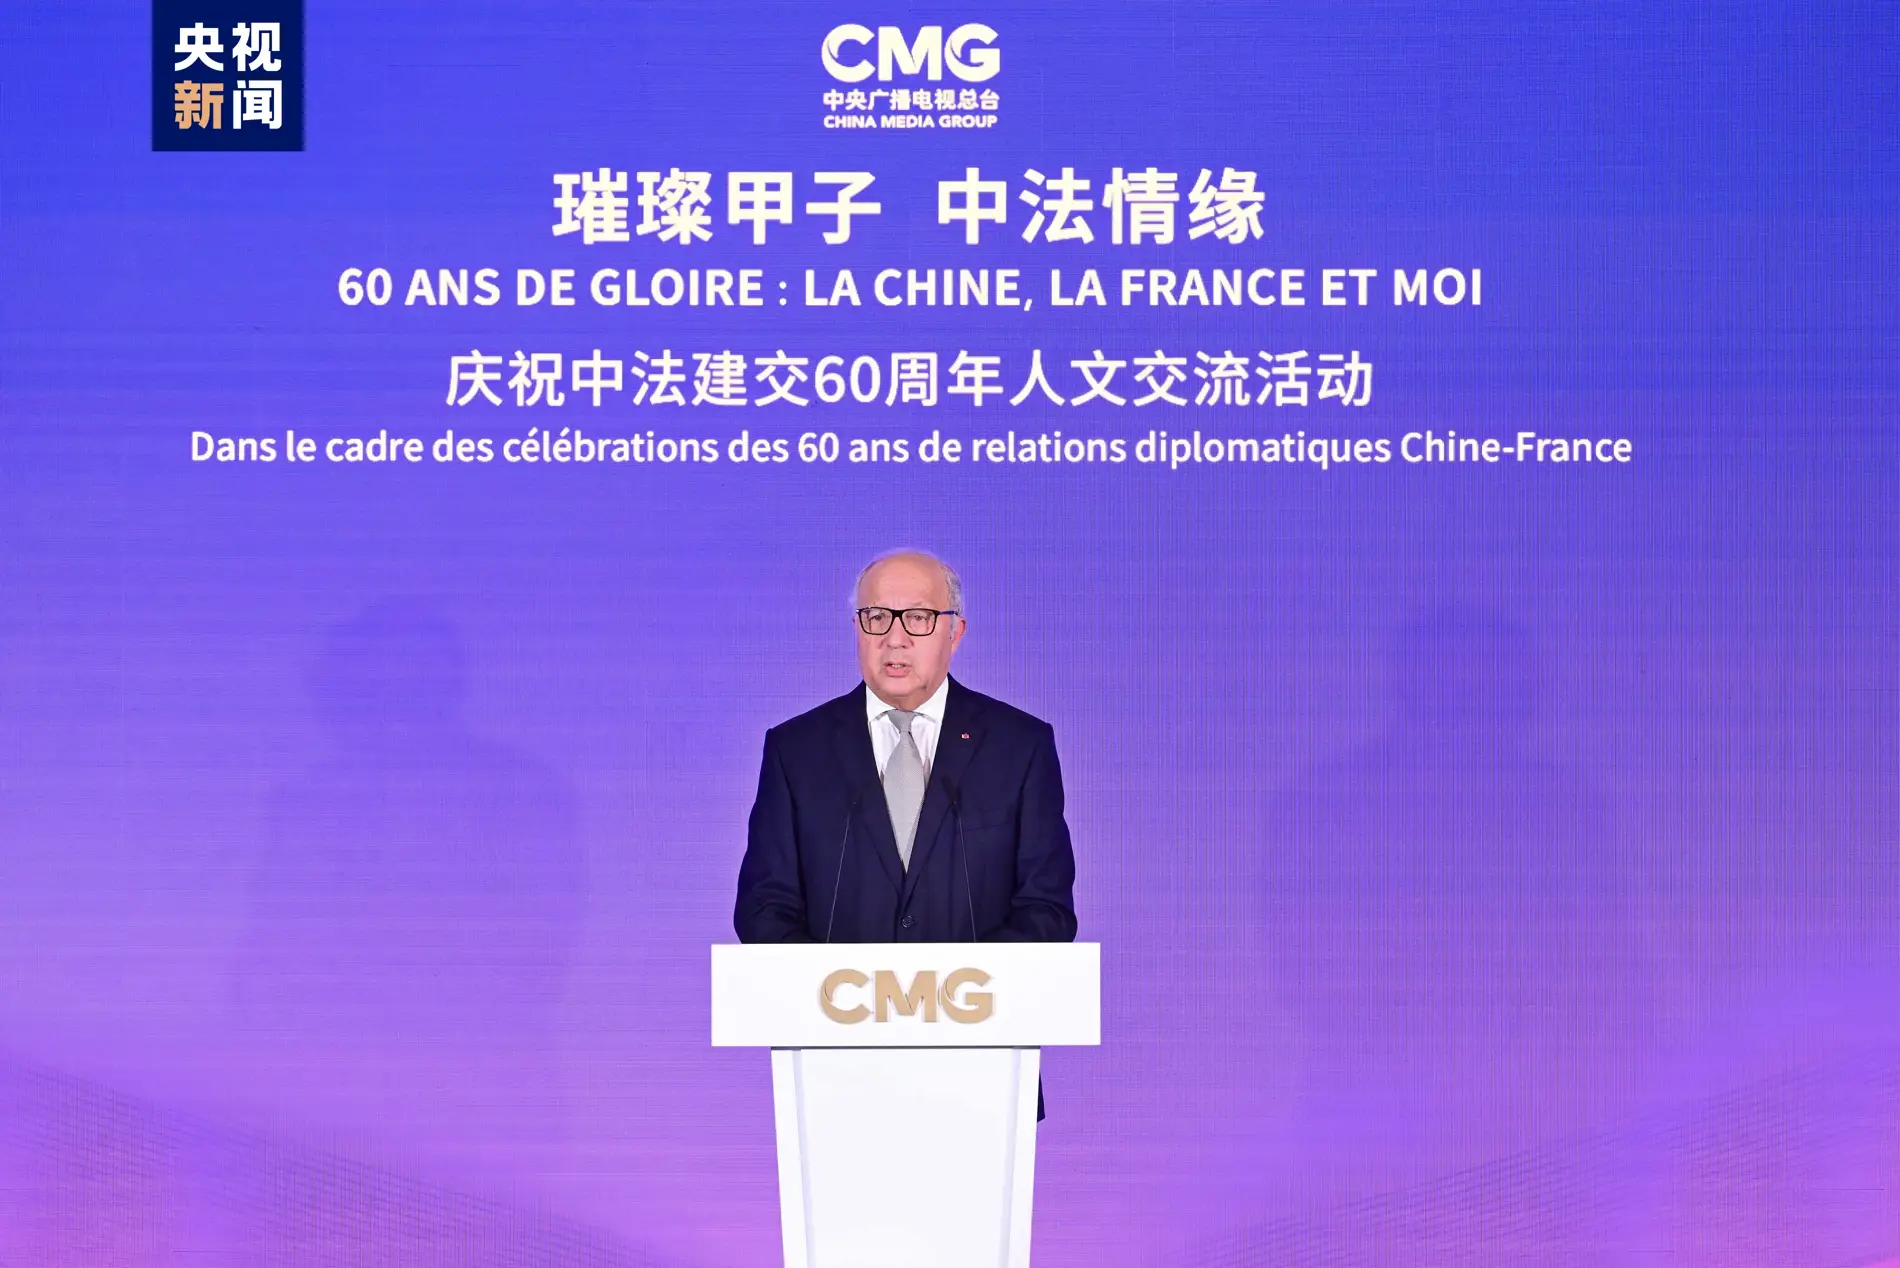 "Ping "Speech" to Near People - Xi Jinping's Favorite Allusions" was broadcast on French mainstream media